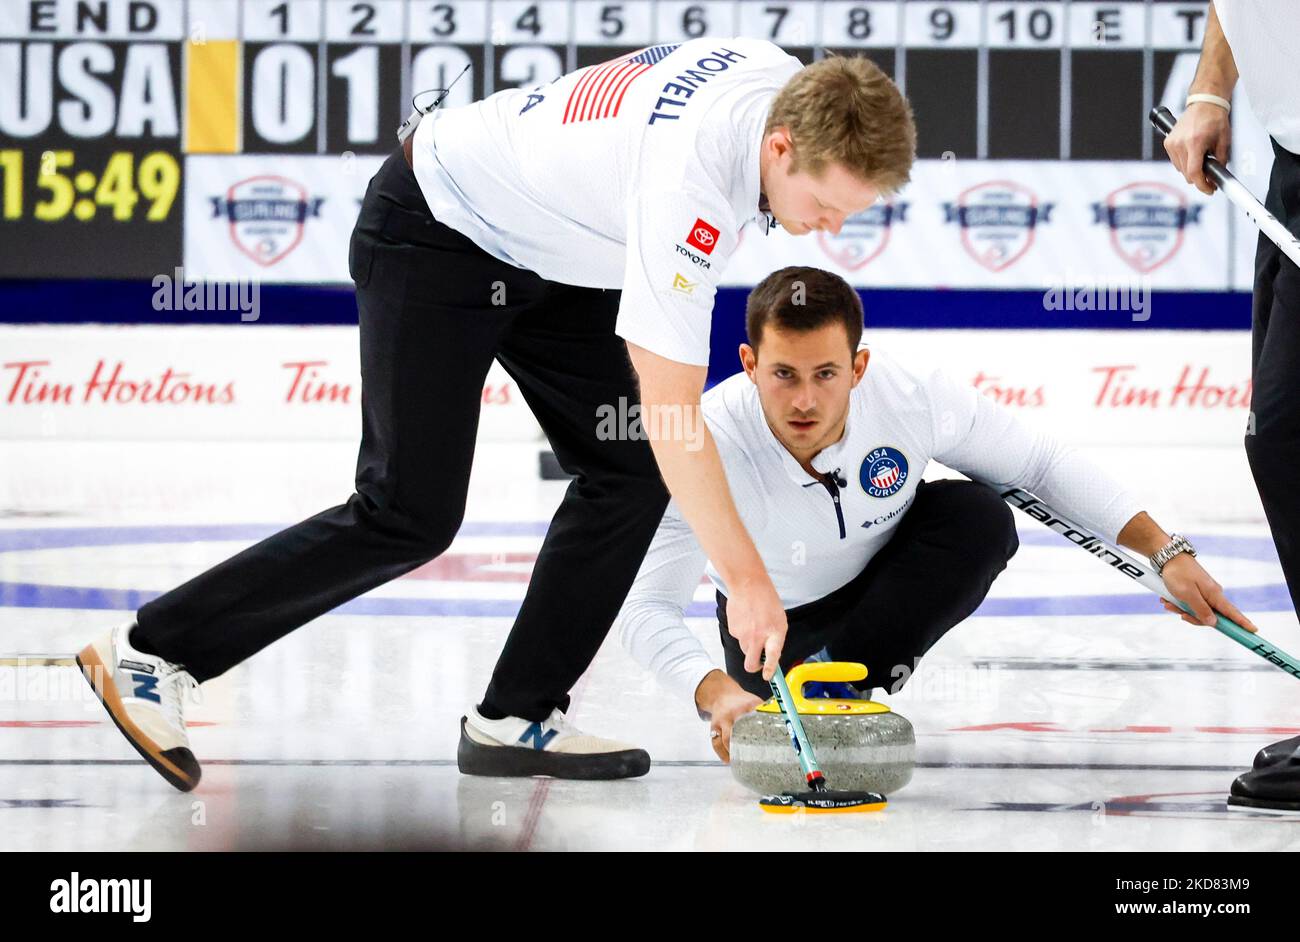 United States skip Korey Dropkin reacts after delivering a stone against Italy during a bronze medal game at the World Mens Curling Championships, Sunday, April 10, 2022, in Las Vegas